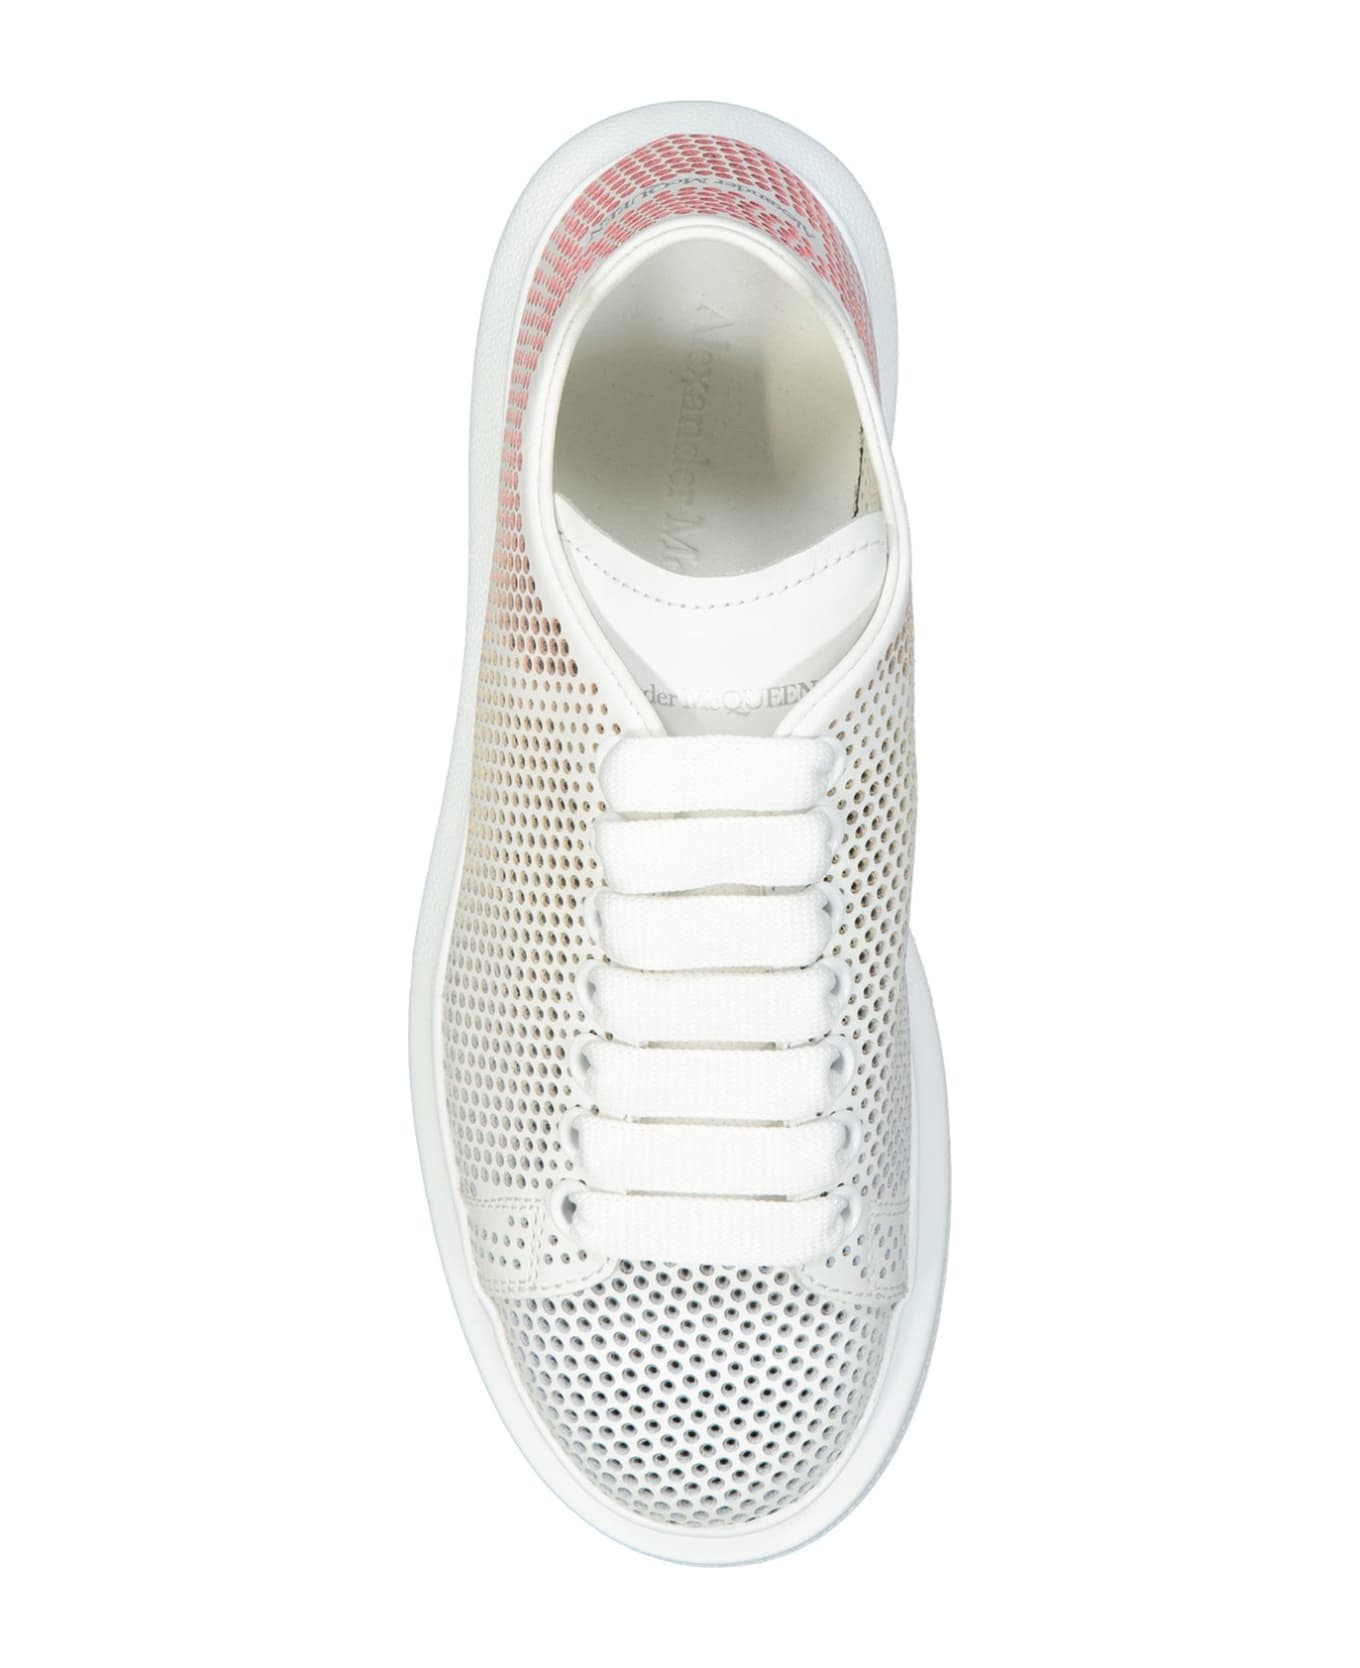 Alexander McQueen Oversized Dotted Cut-out Sneakers - White